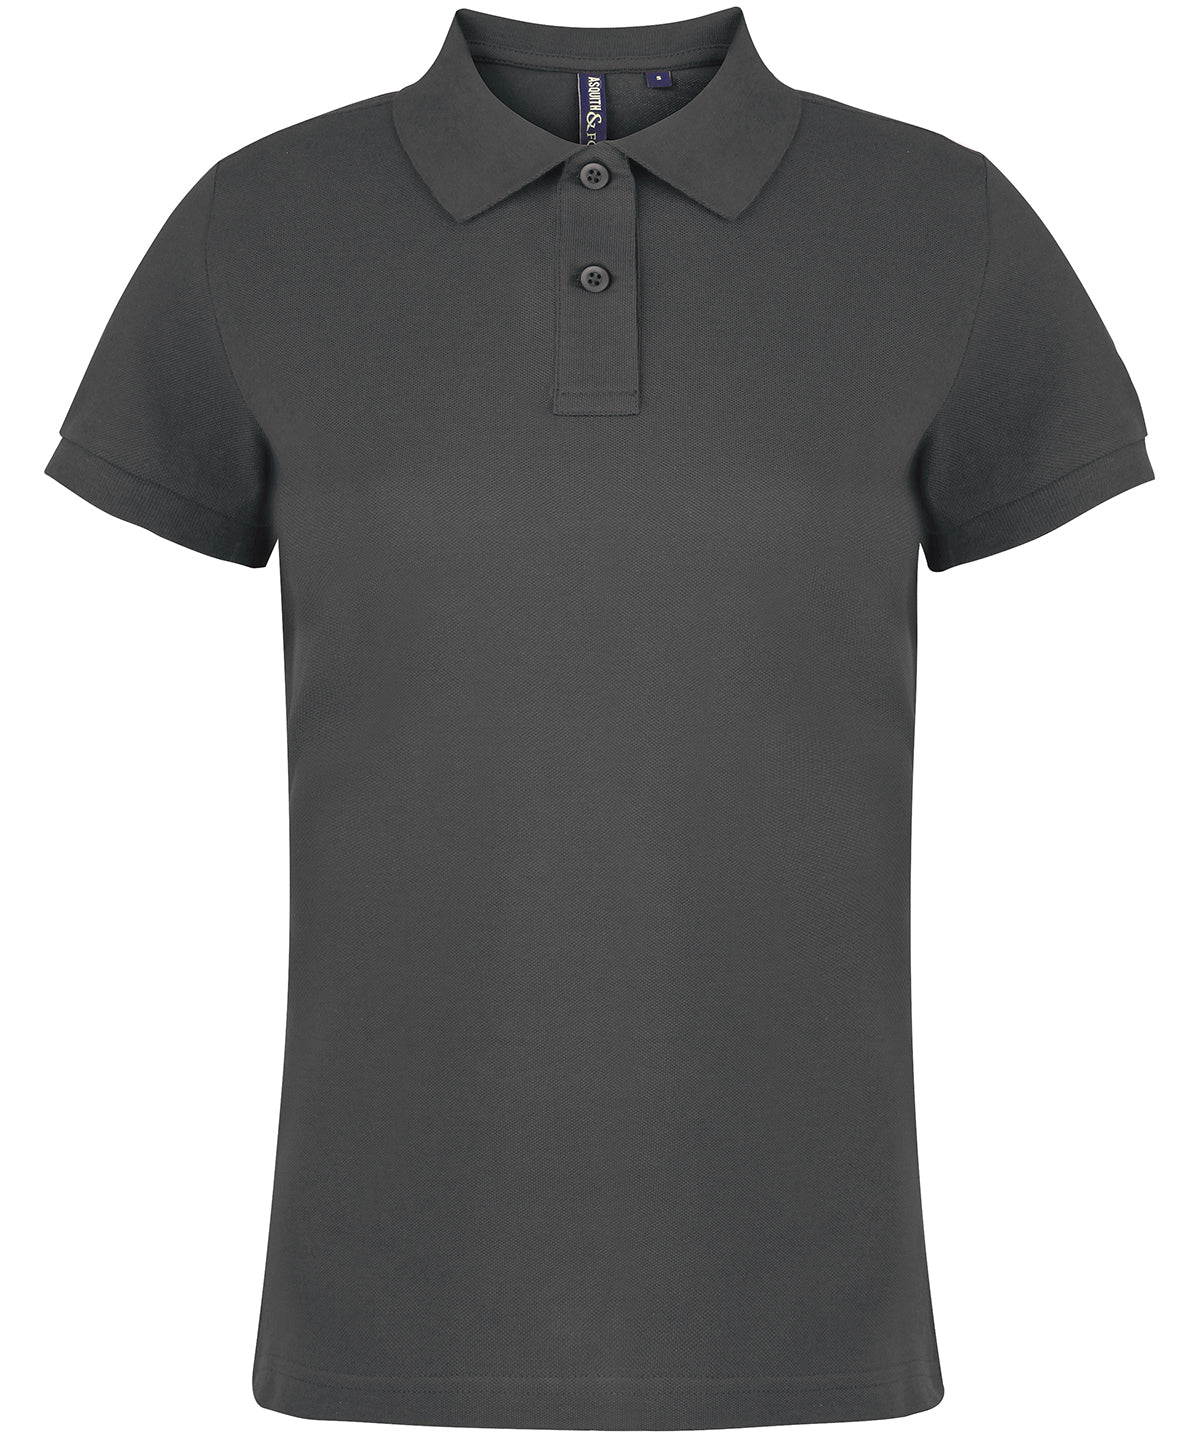 Personalised Polo Shirts - Black Asquith & Fox Women's polo